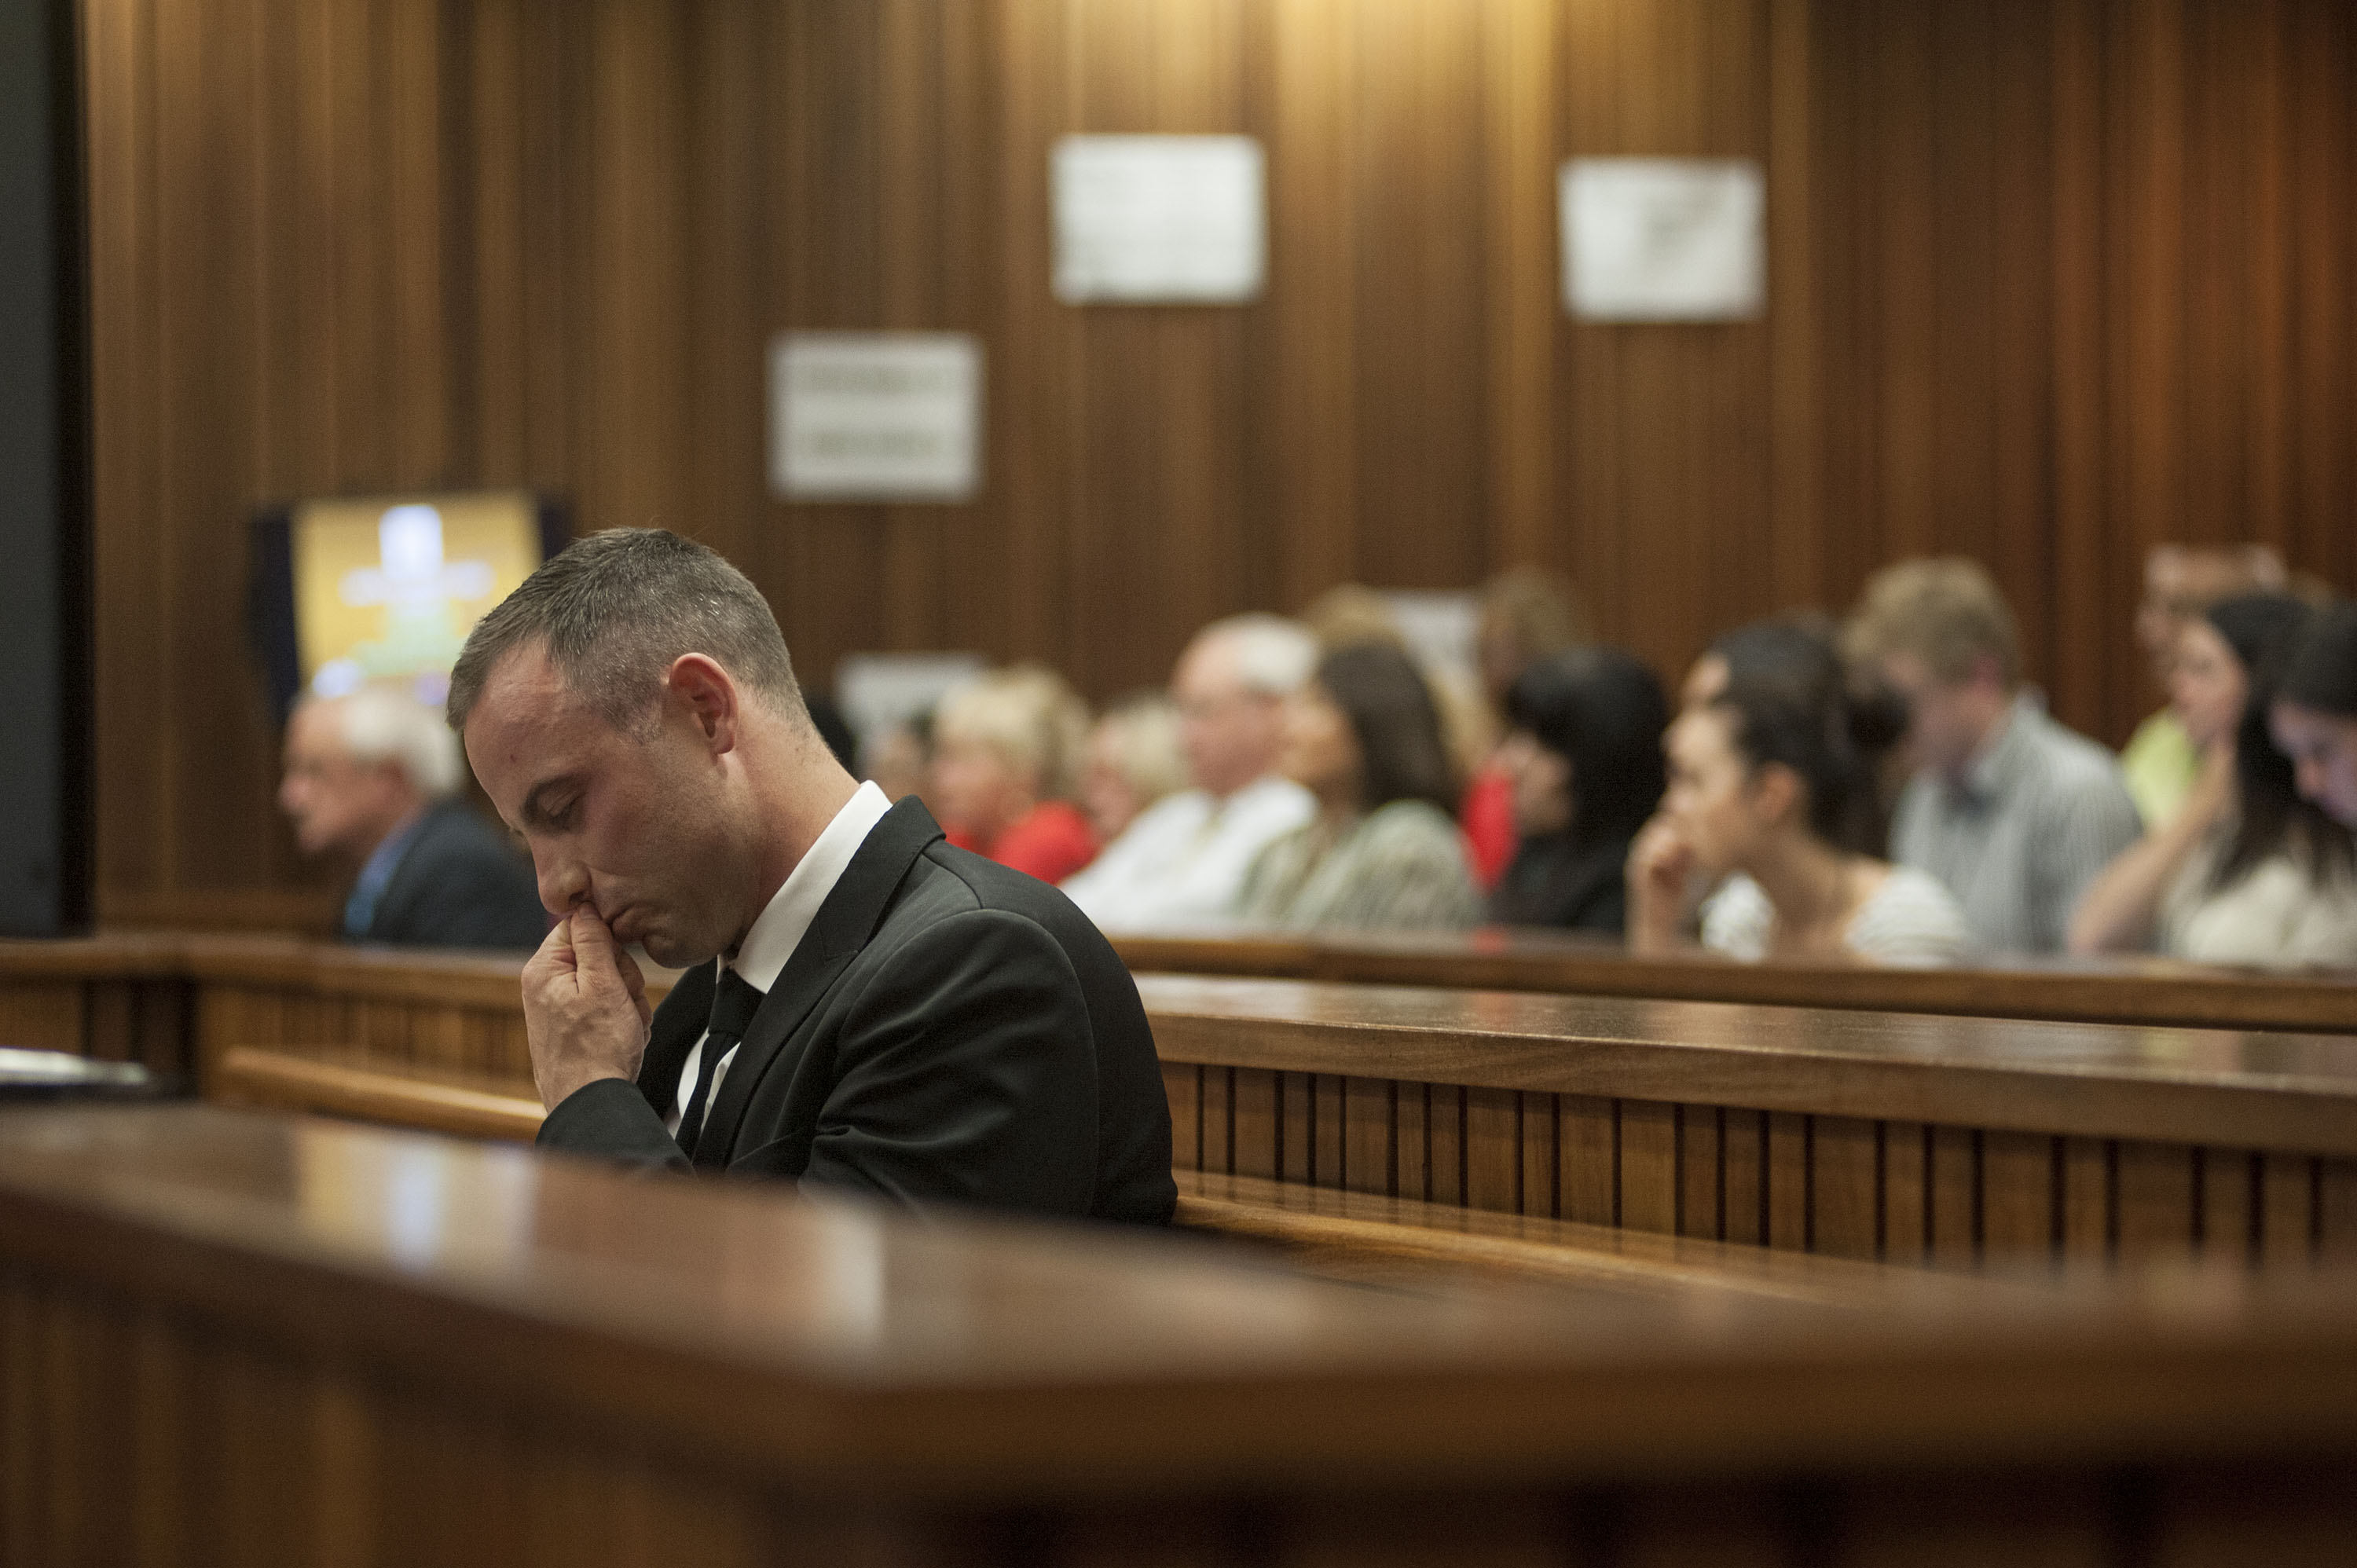 Paralympic athlete Oscar Pistorius in court. May 5, 2014 by Ihsaan Haffejee. Demotix.